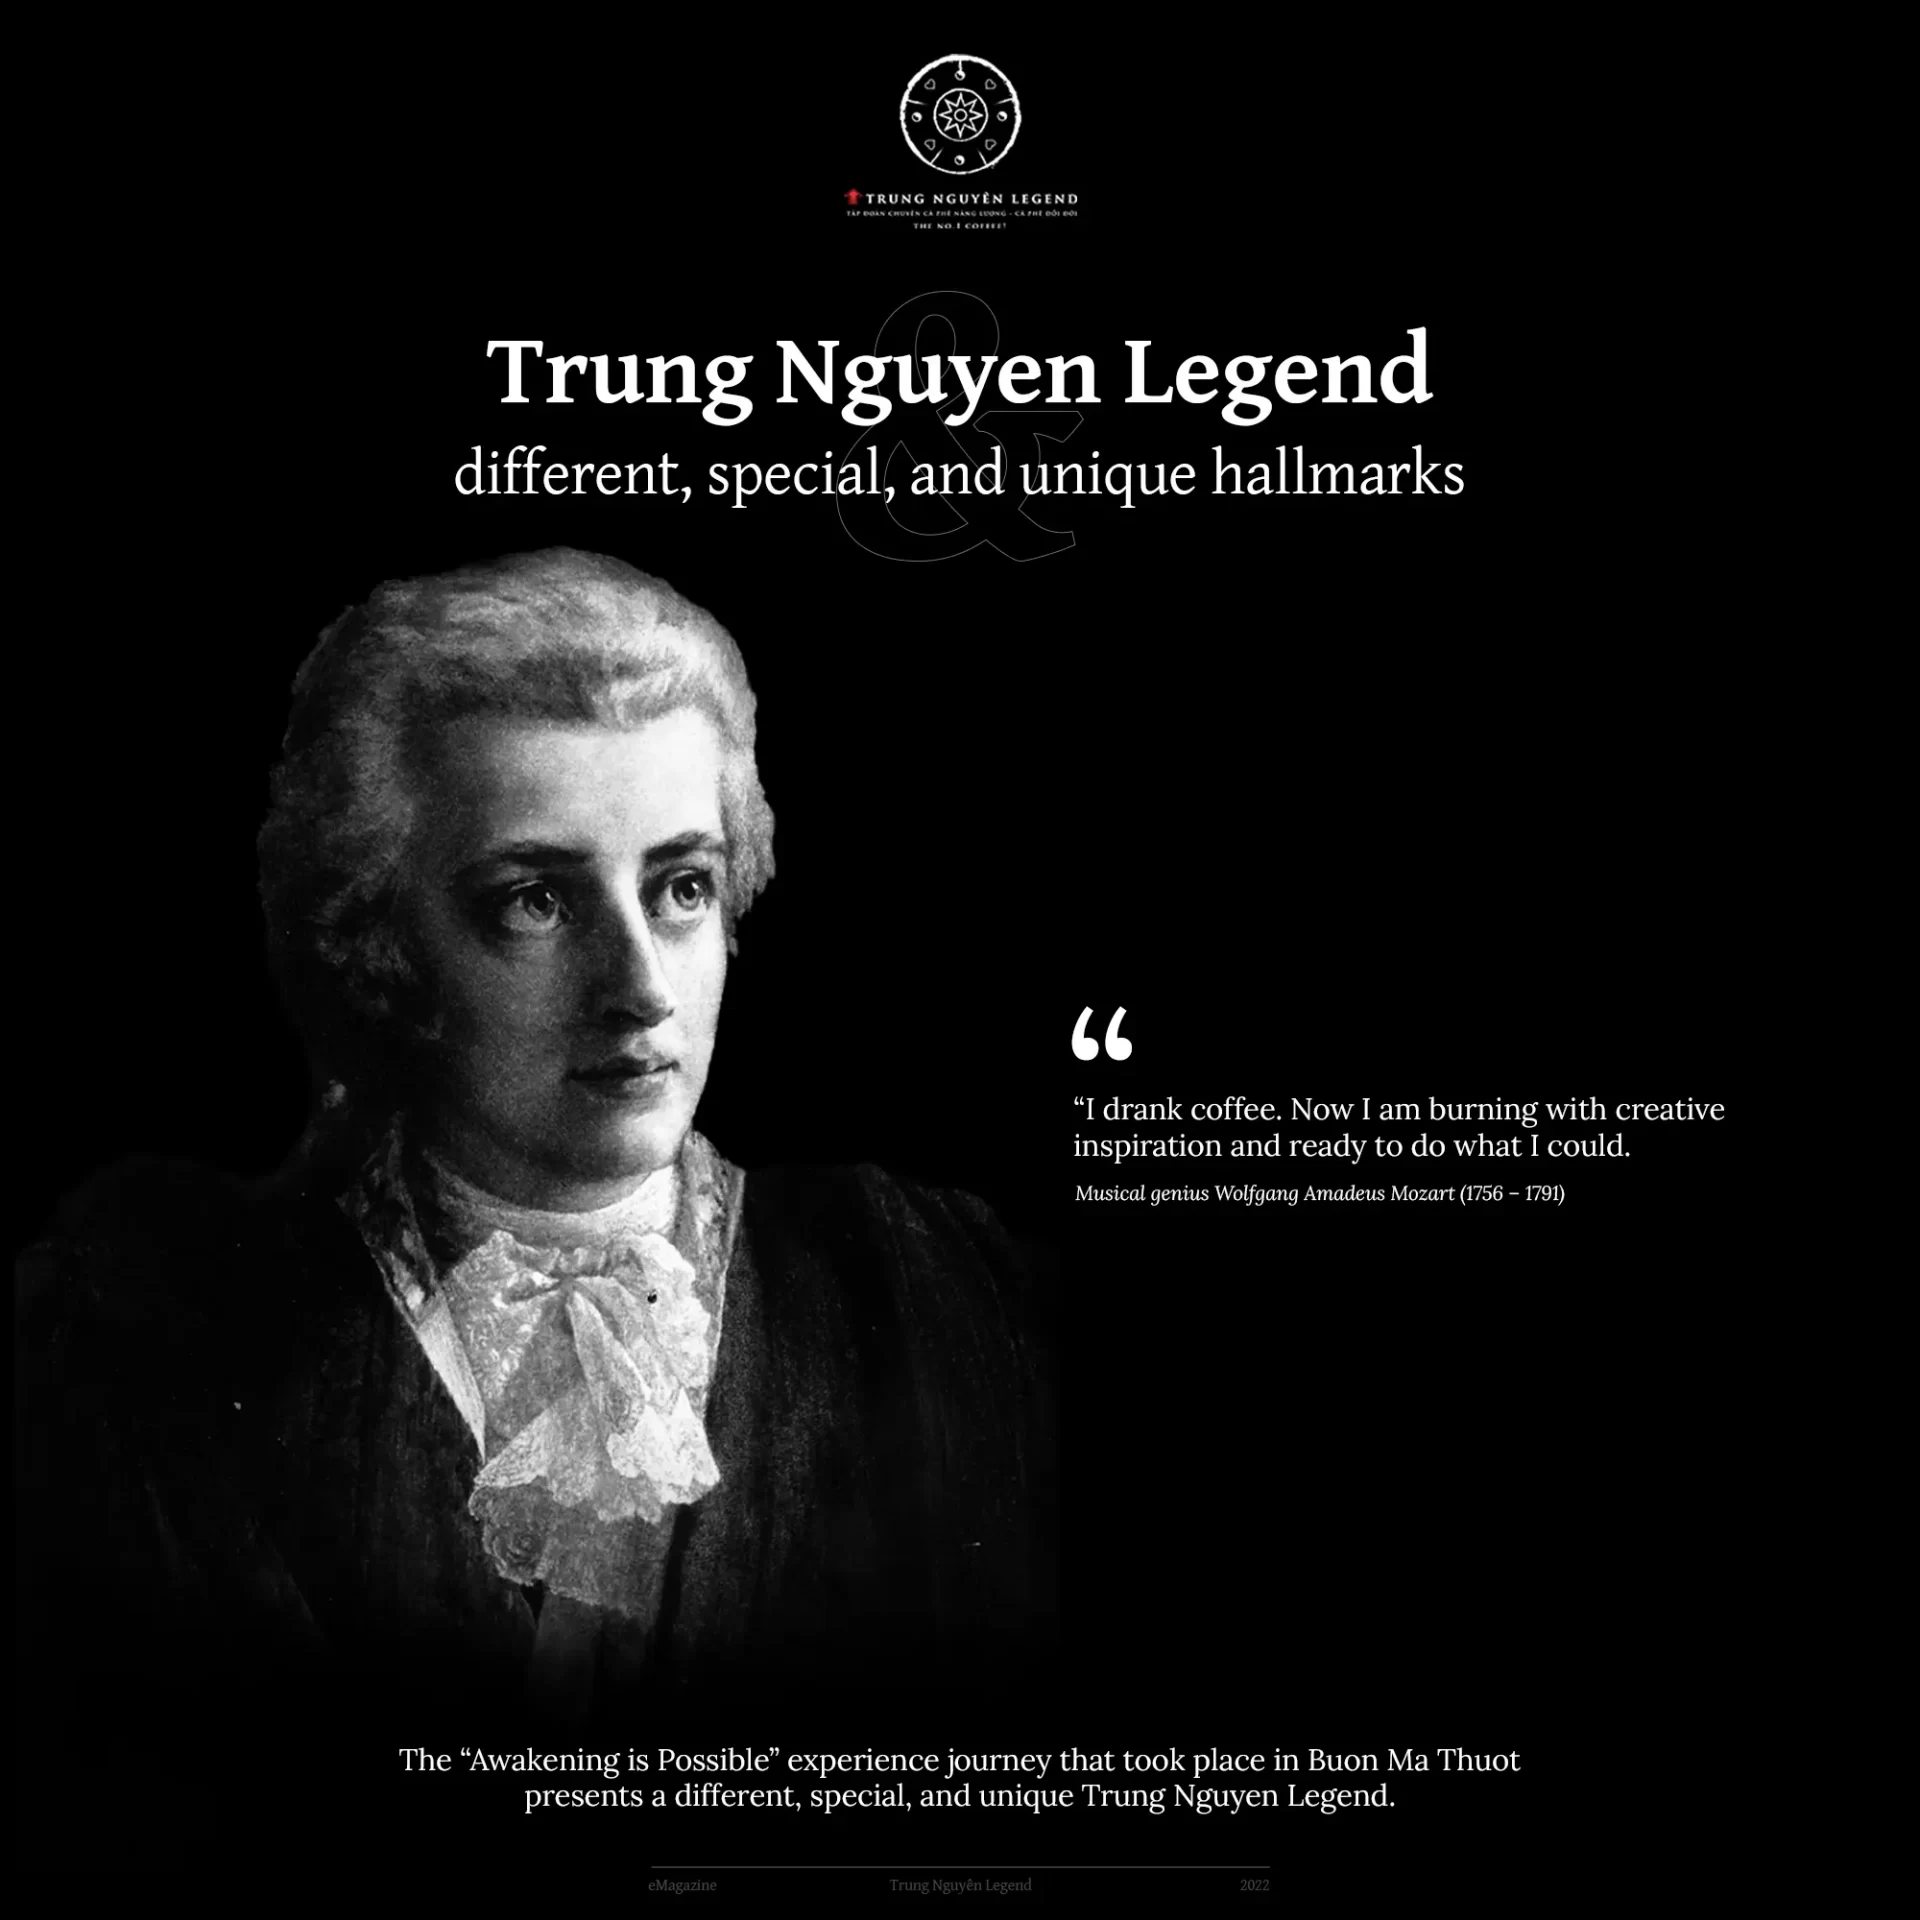 Trung Nguyen Legend & different, special, and unique hallmarks